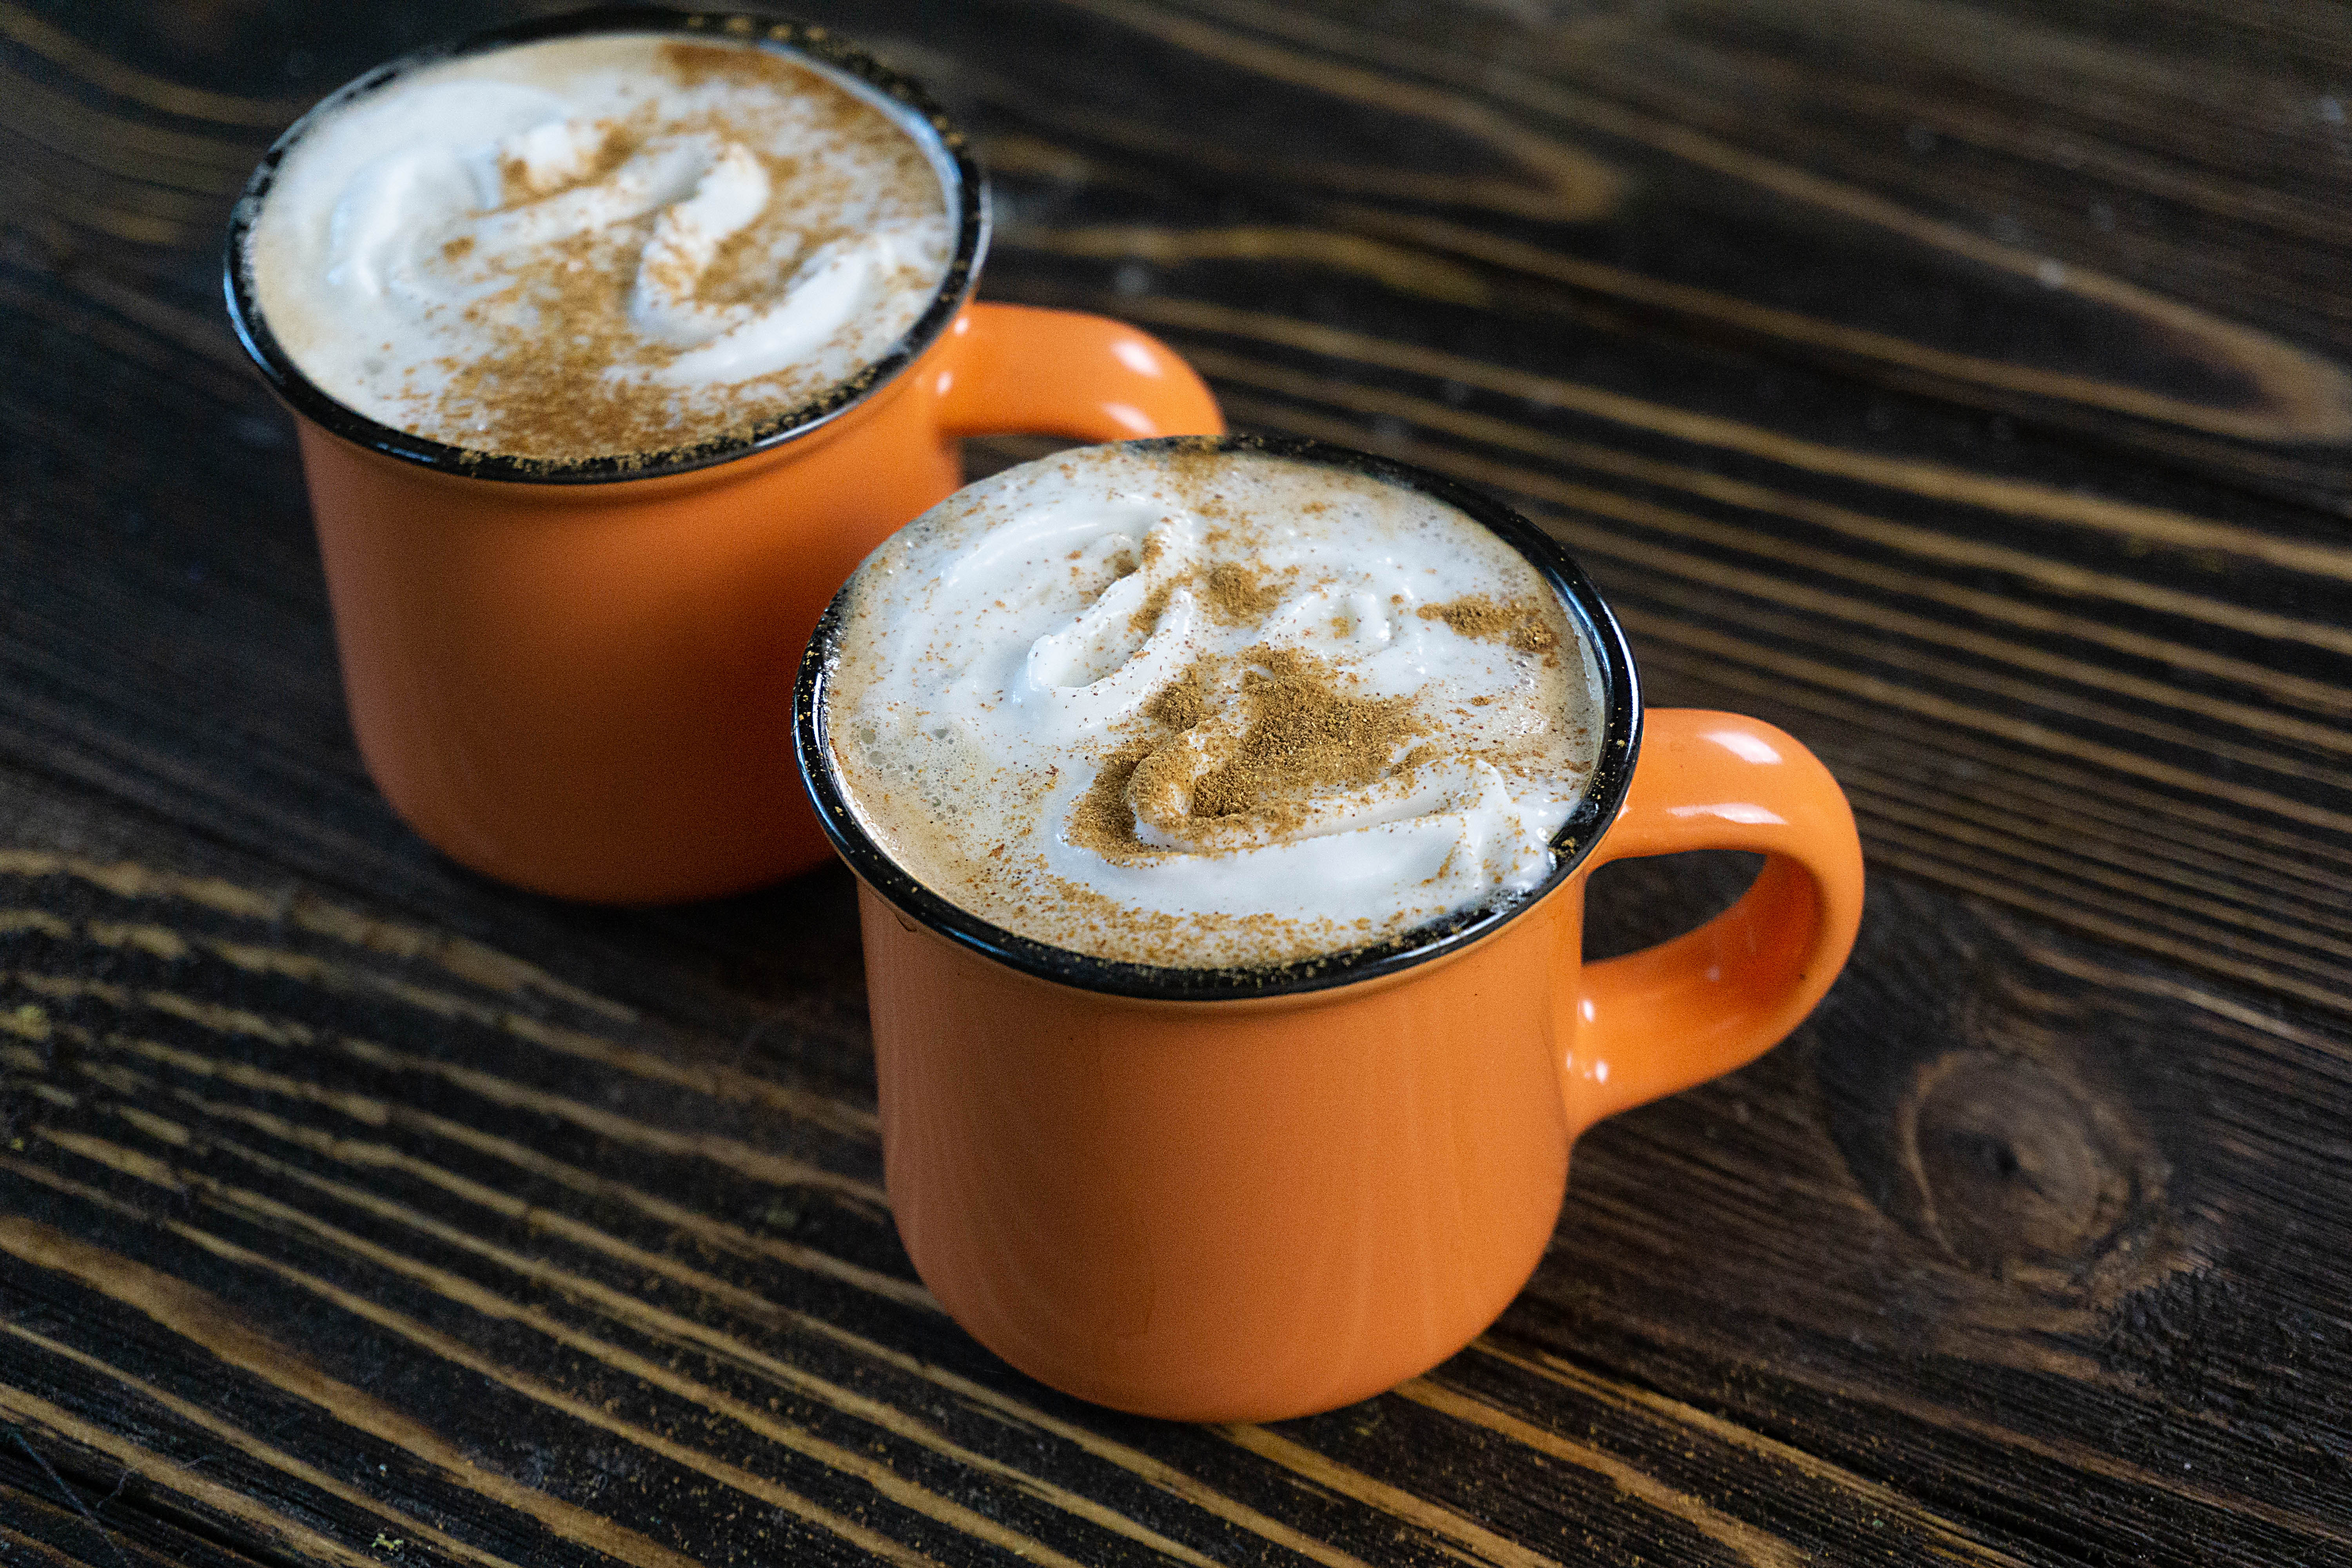 It's fall and it's time for amazing and delicious fall warm drinks! Check out this awesome Pumpkin Vanilla Expresso recipe is perfect for the autumn season!